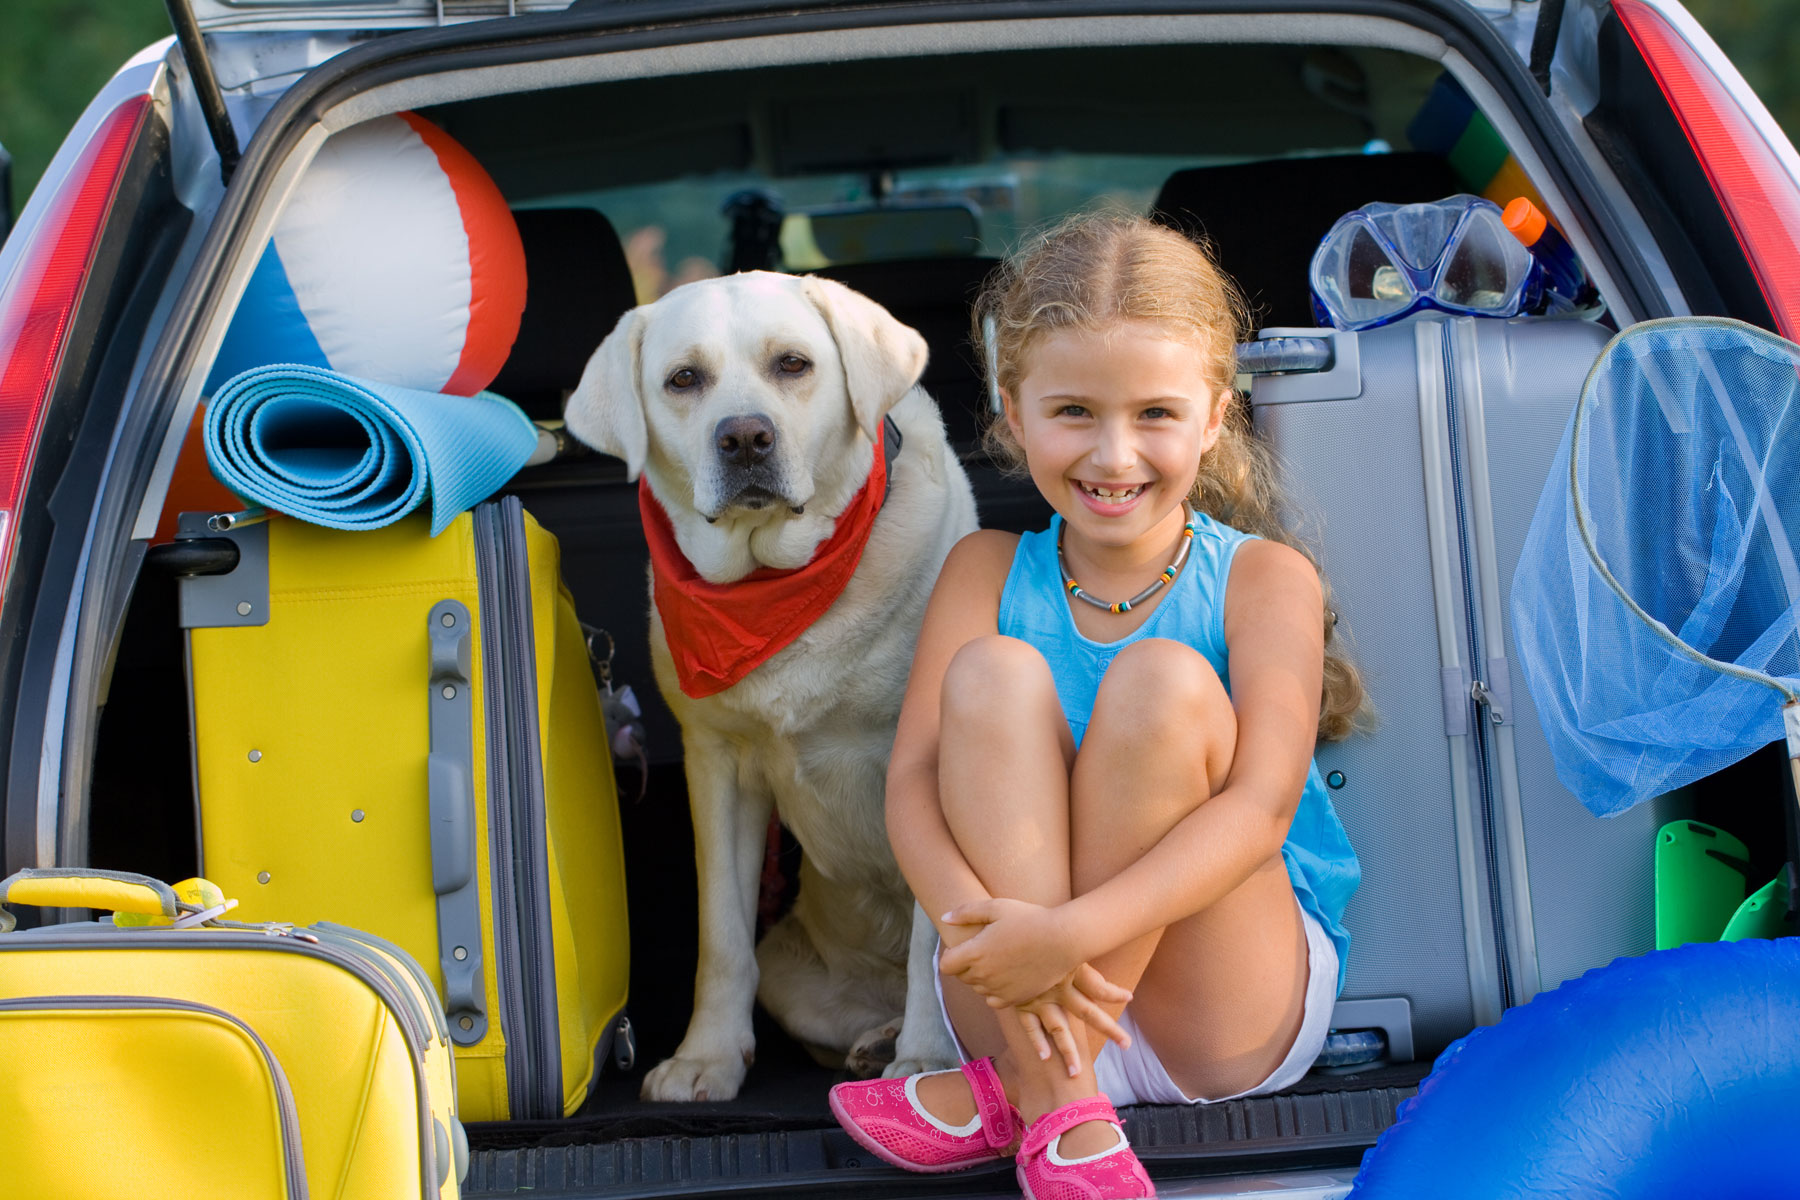 Over 90% of long-distance holiday travel is by car and while some dogs in p...